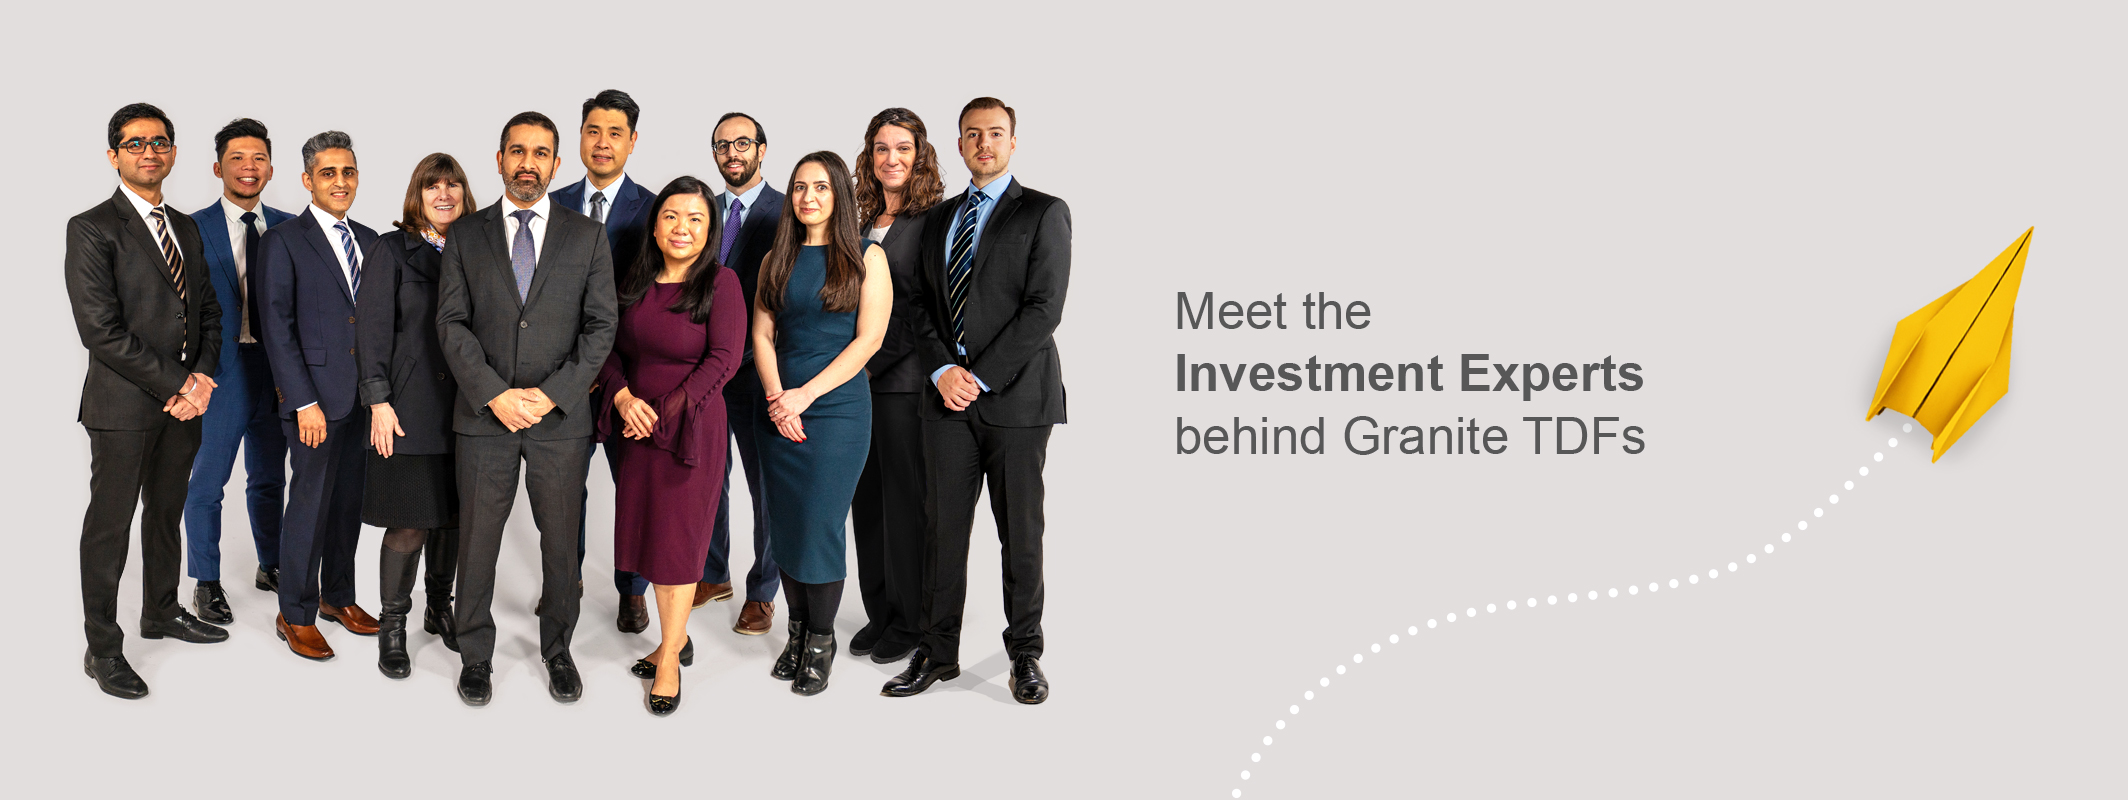 Meet the investment experts behind Granite TDFs